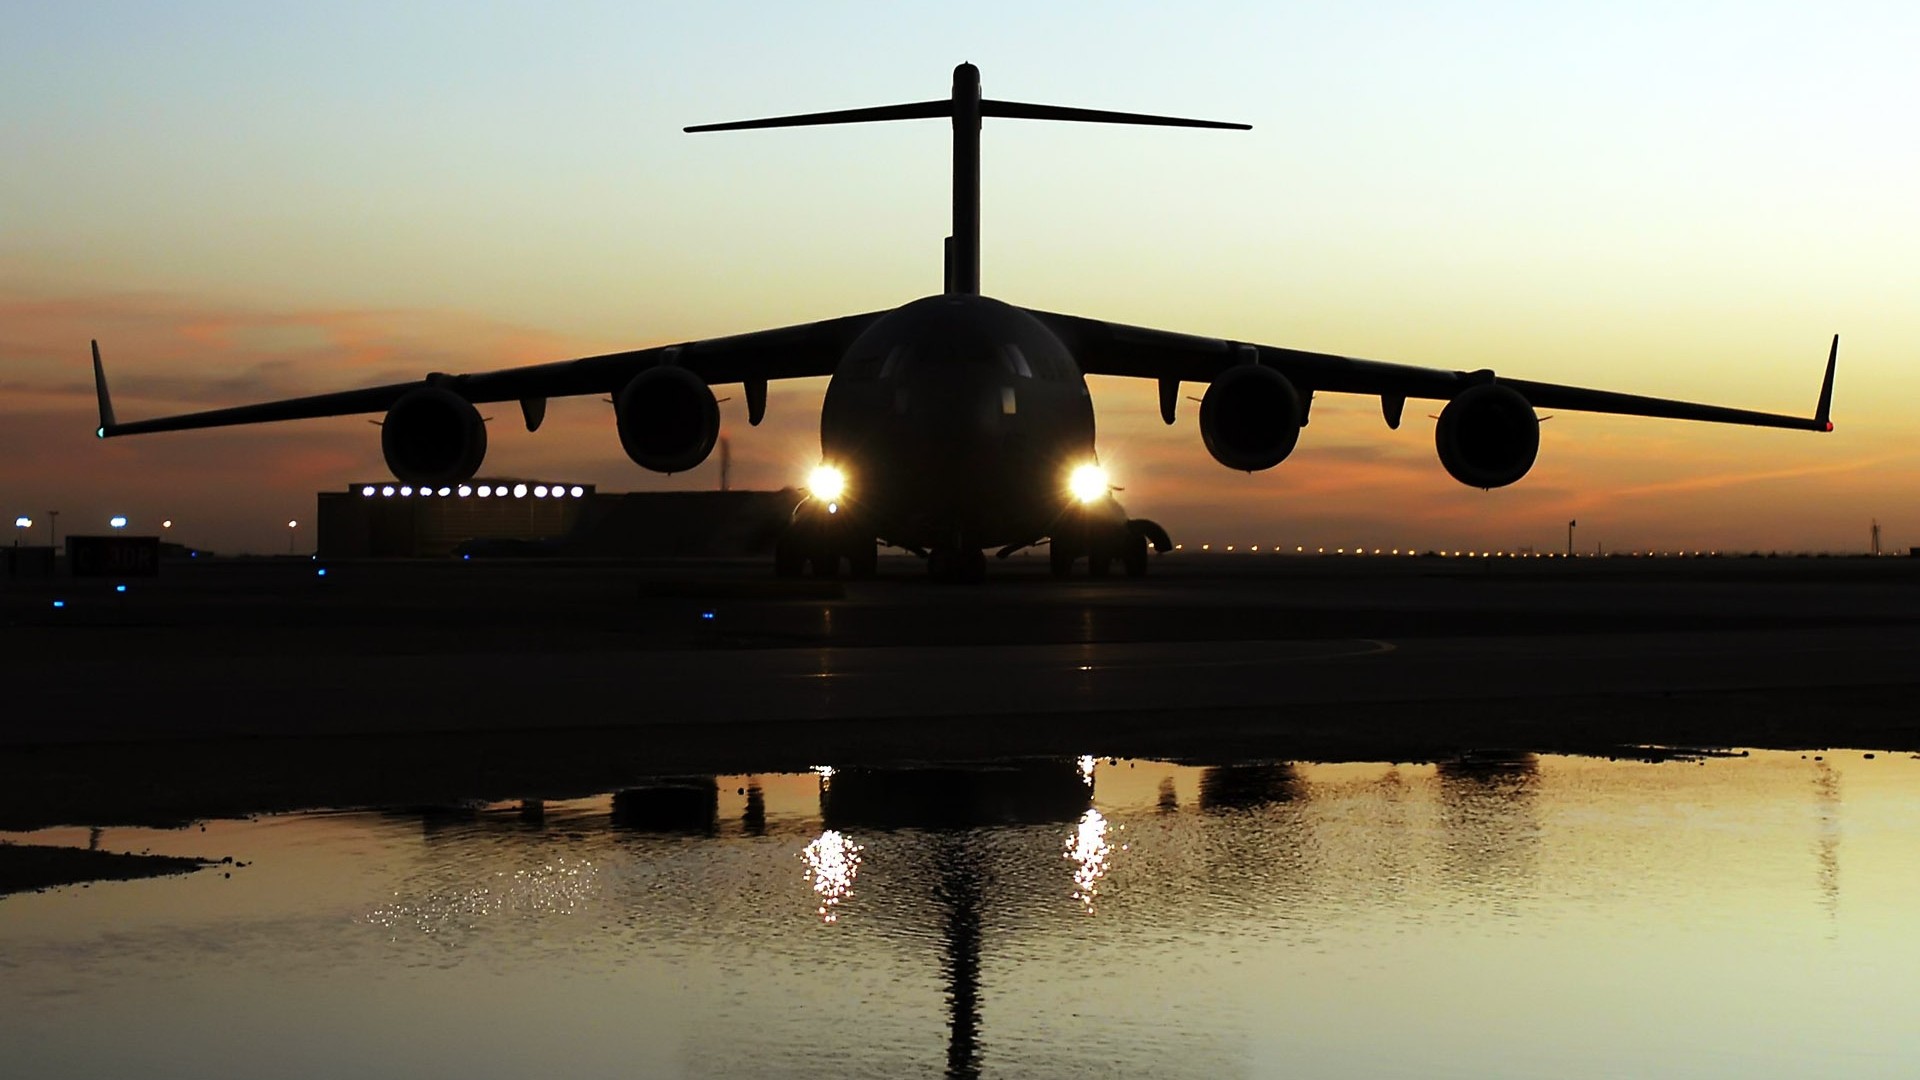 General 1920x1080 military aircraft airplane silhouette aircraft military frontal view vehicle military vehicle Boeing C-17 Globemaster III Boeing American aircraft jets reflection water